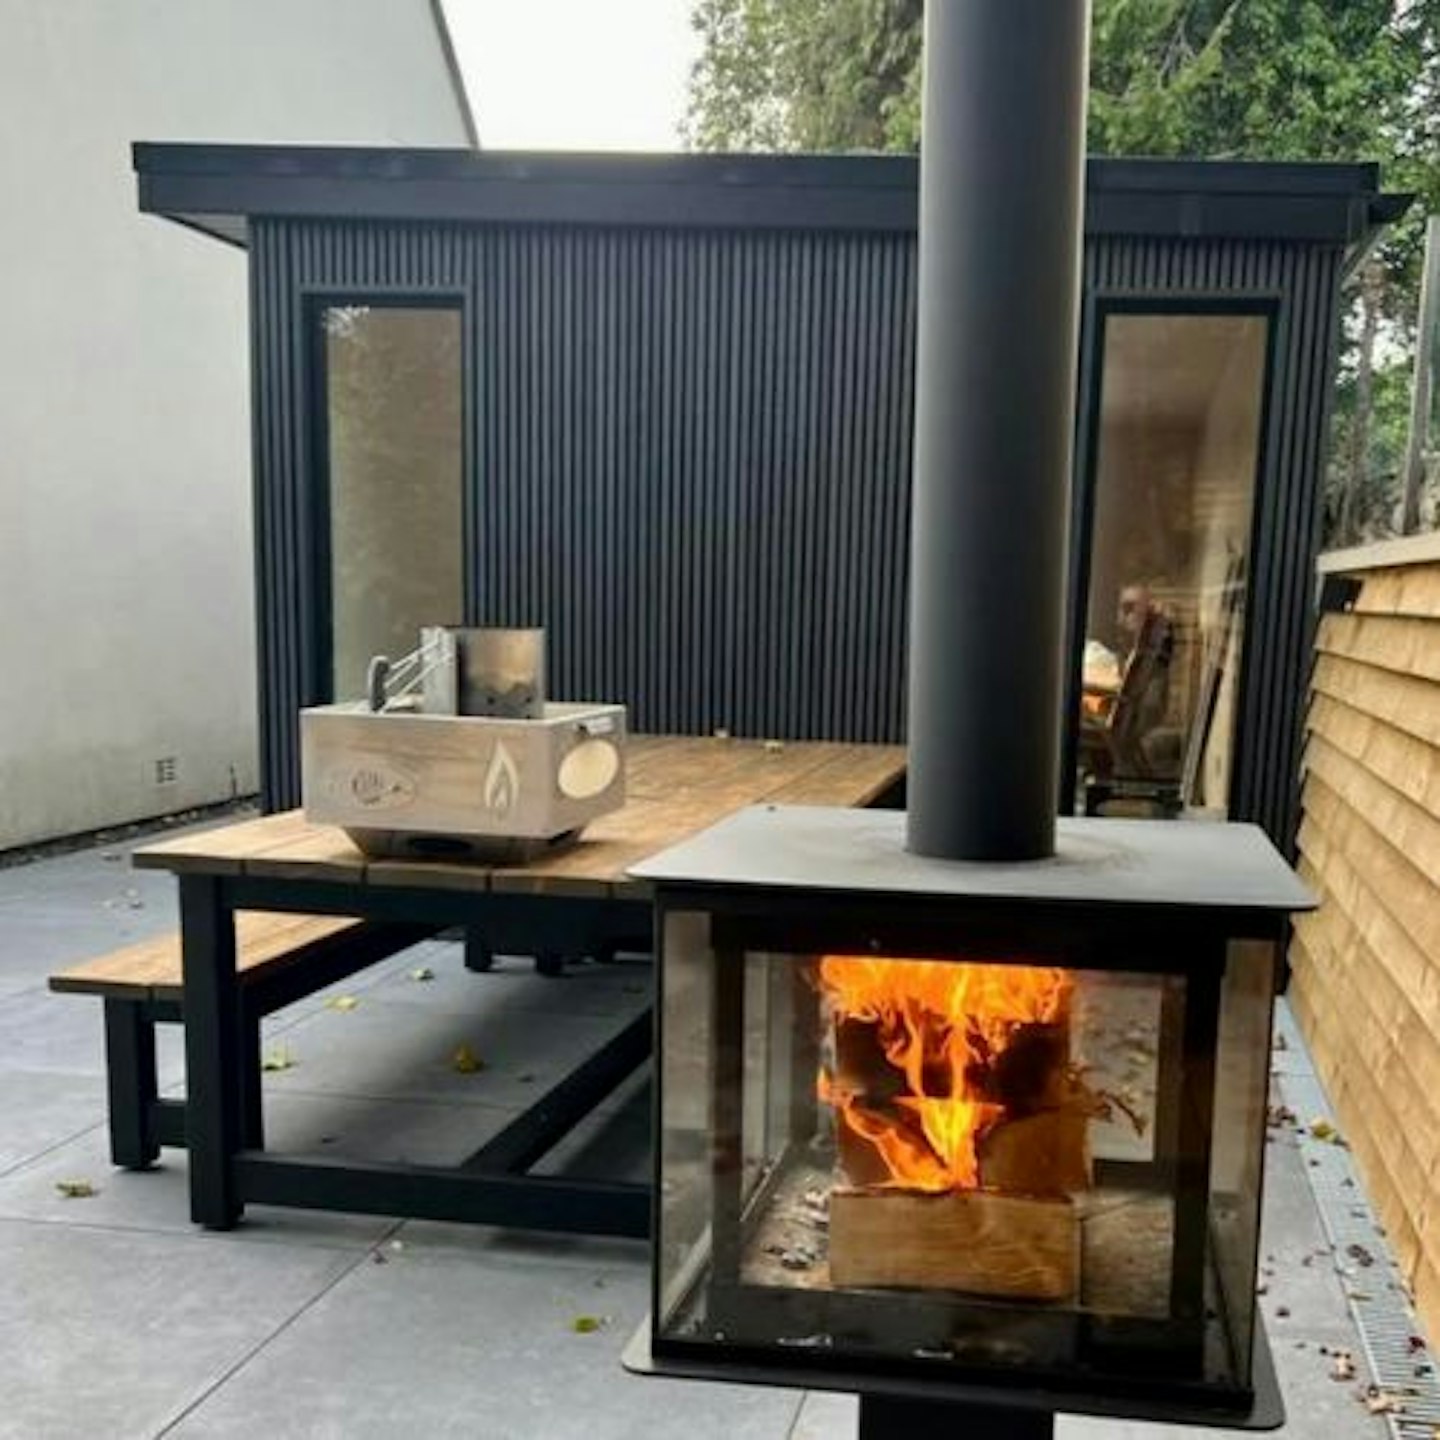 The Garden Cube - Outdoor Wood Burning Stove